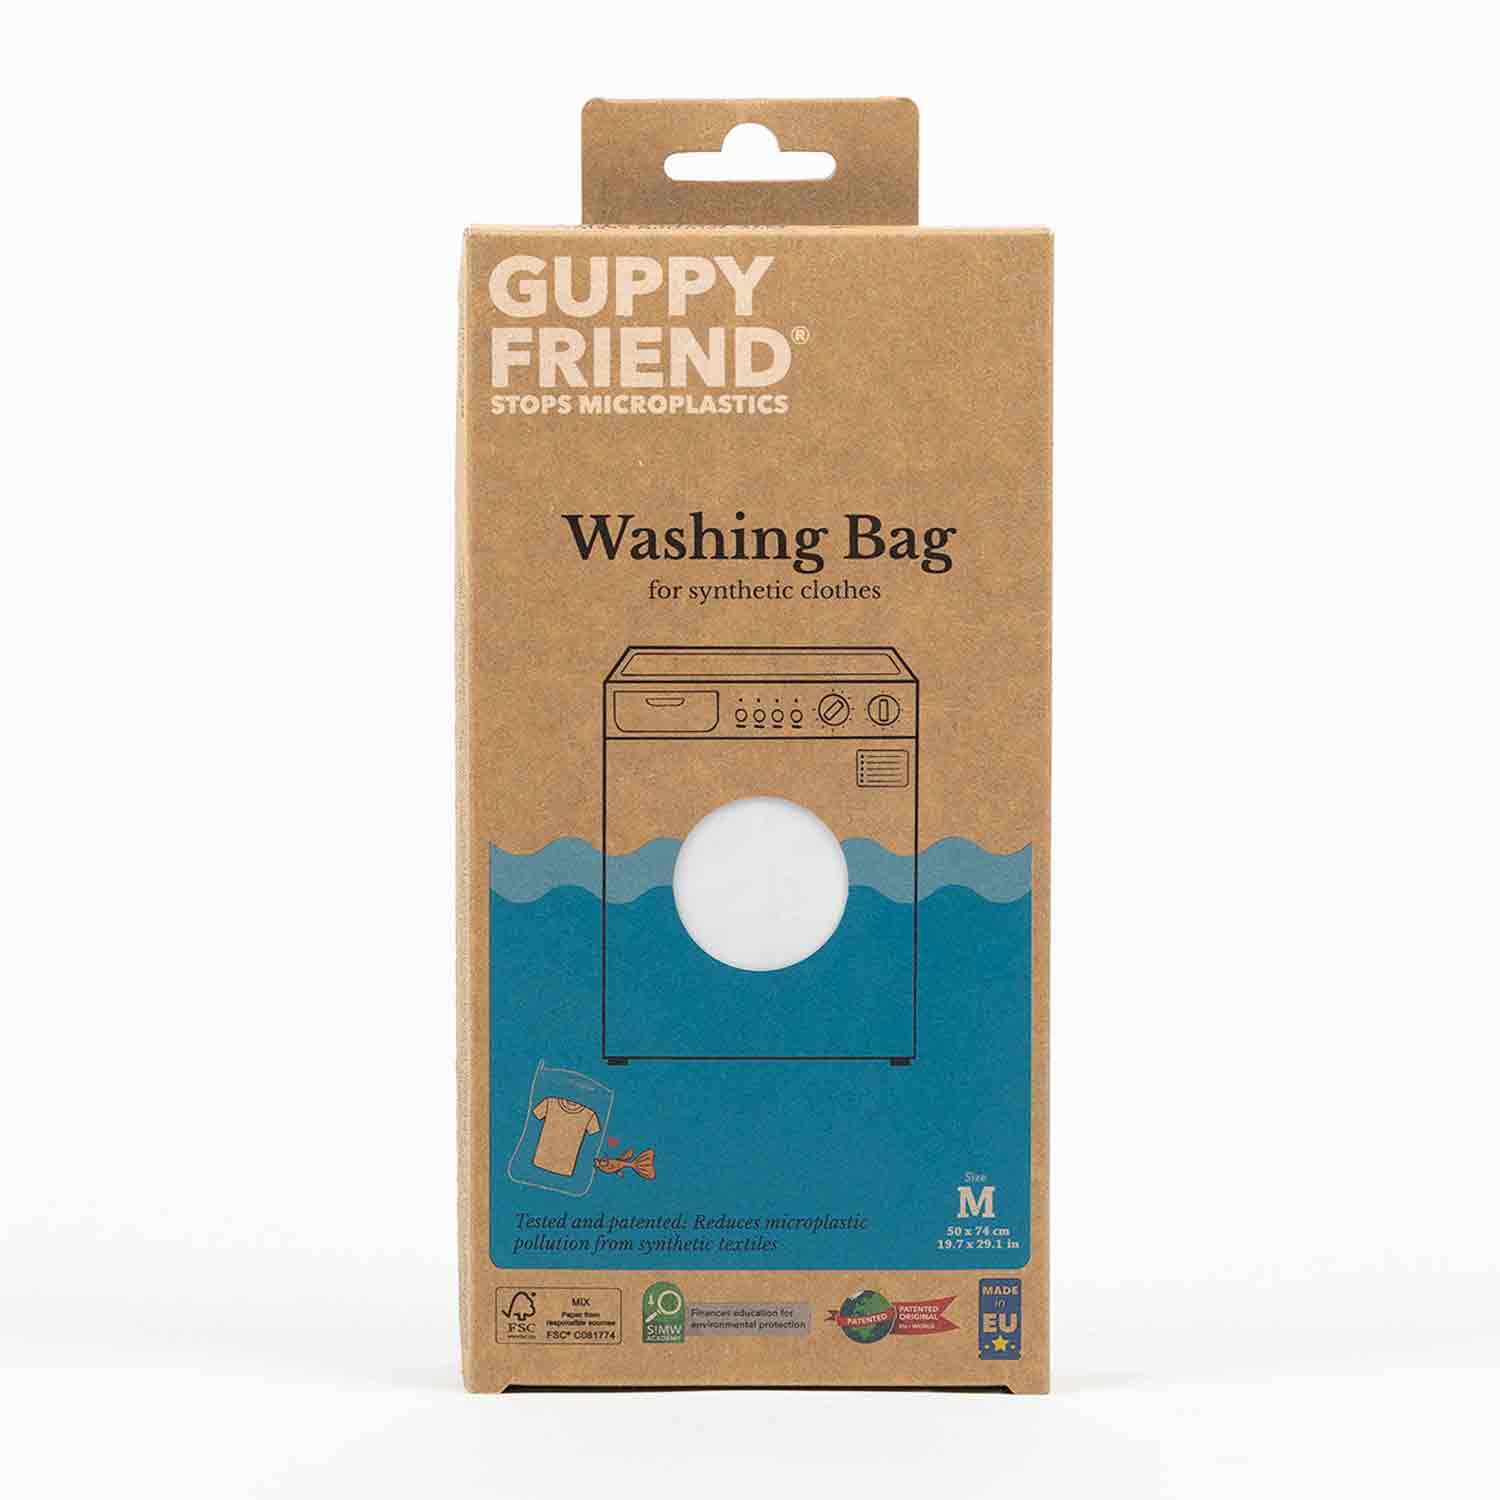 Laundry bag by Guppyfriend - fight microplastic! product photo